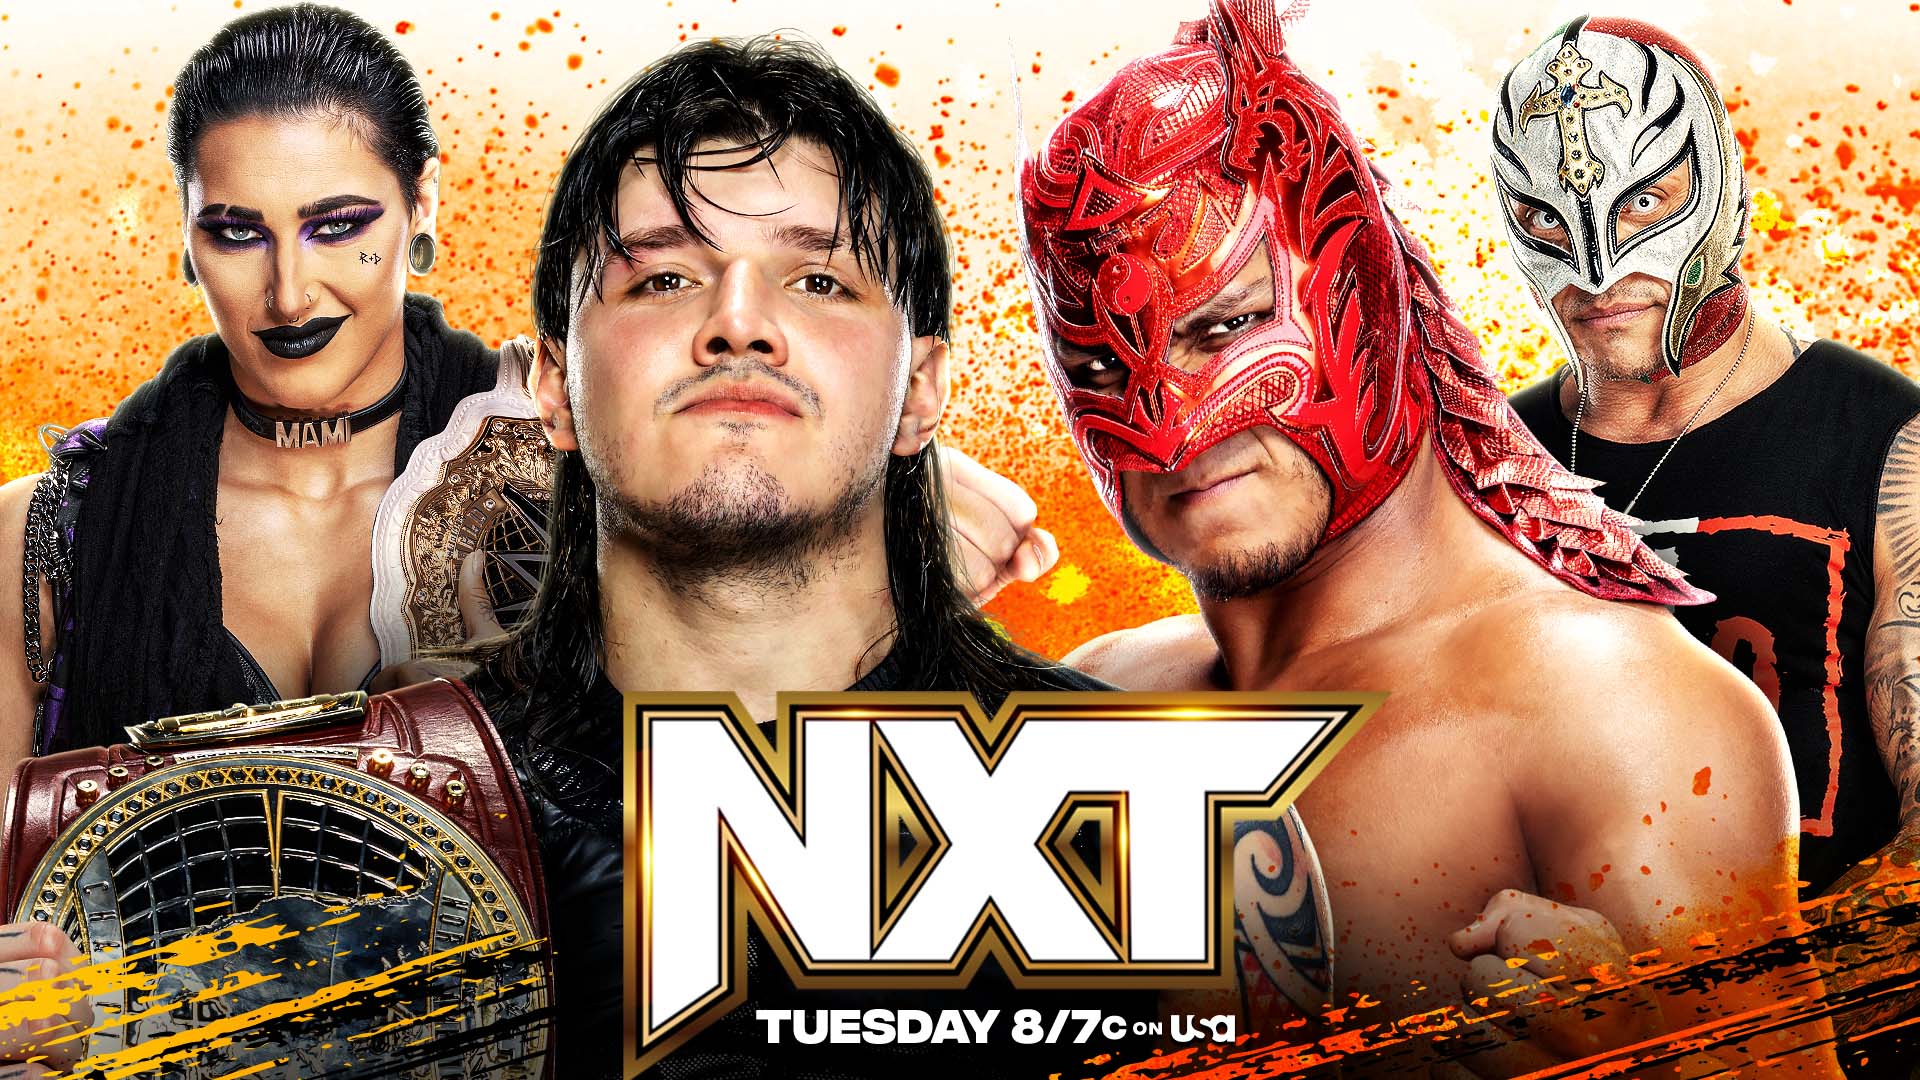 A WWE NXT match graphic featuring Dominik Mysterio, Dragon Lee, Rey Mysterio, and Rhea Ripley.